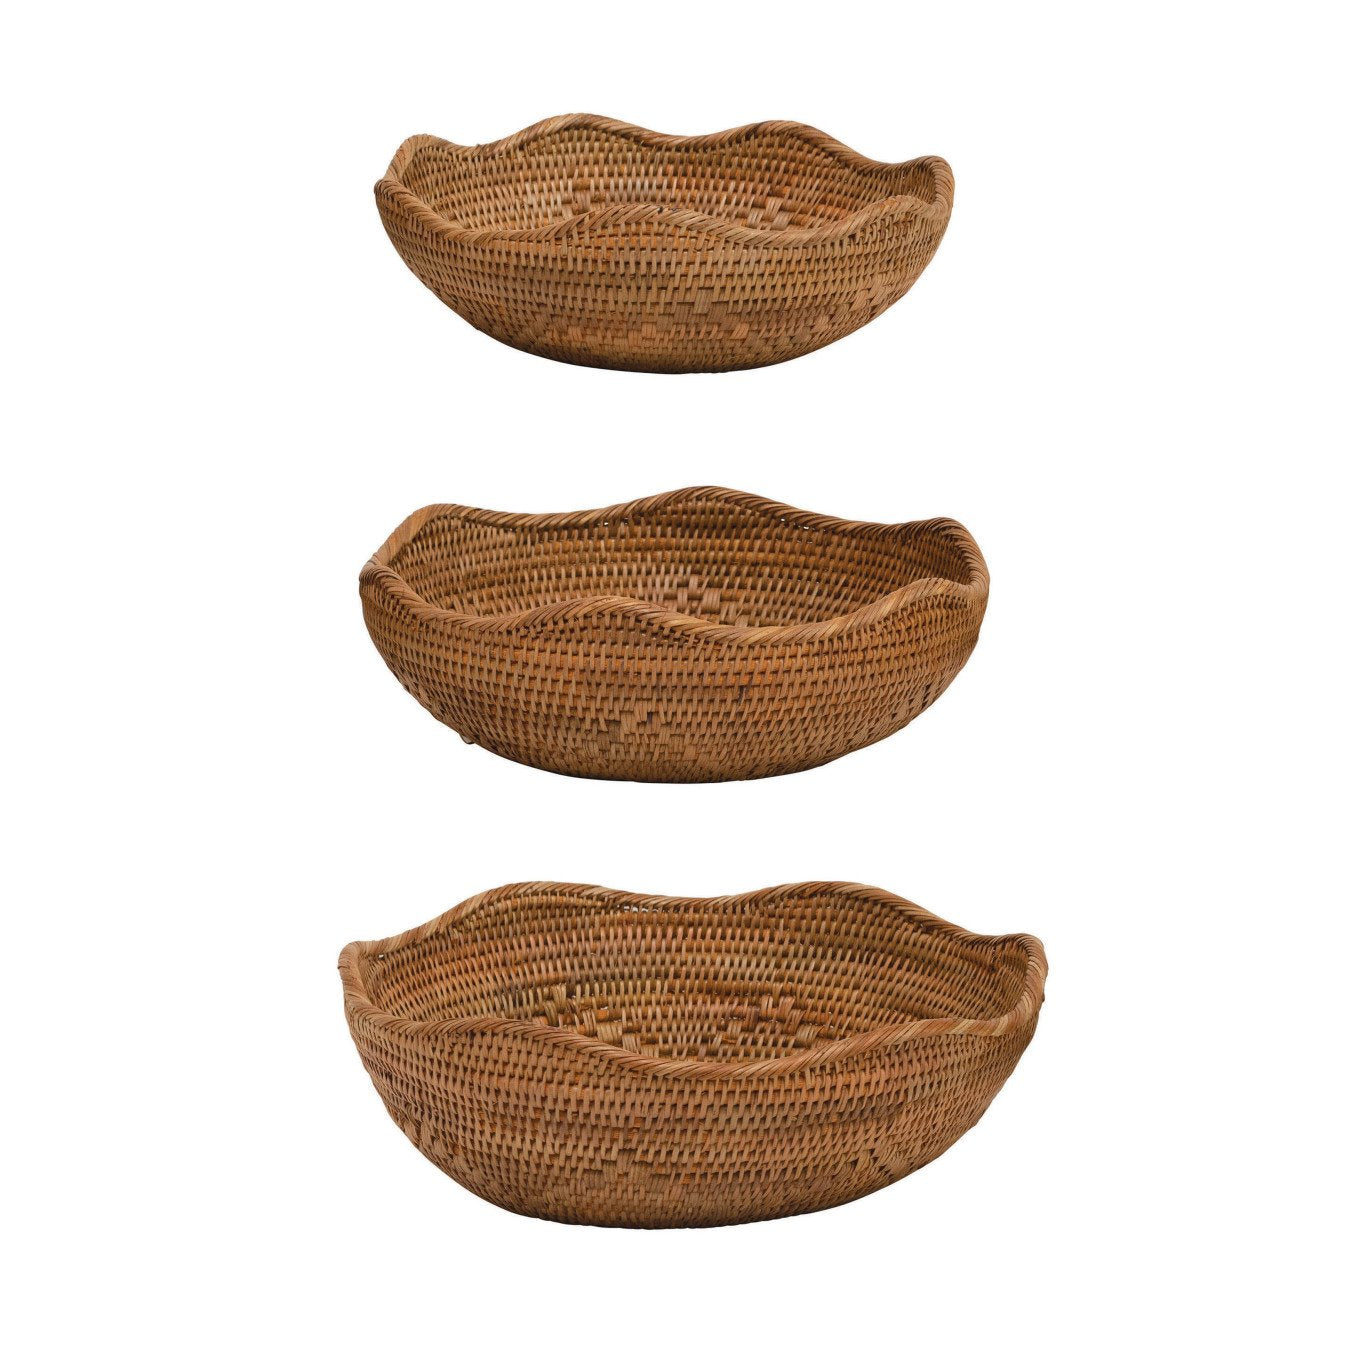 Bloomingville - Hand Woven Bowls - Set of 3